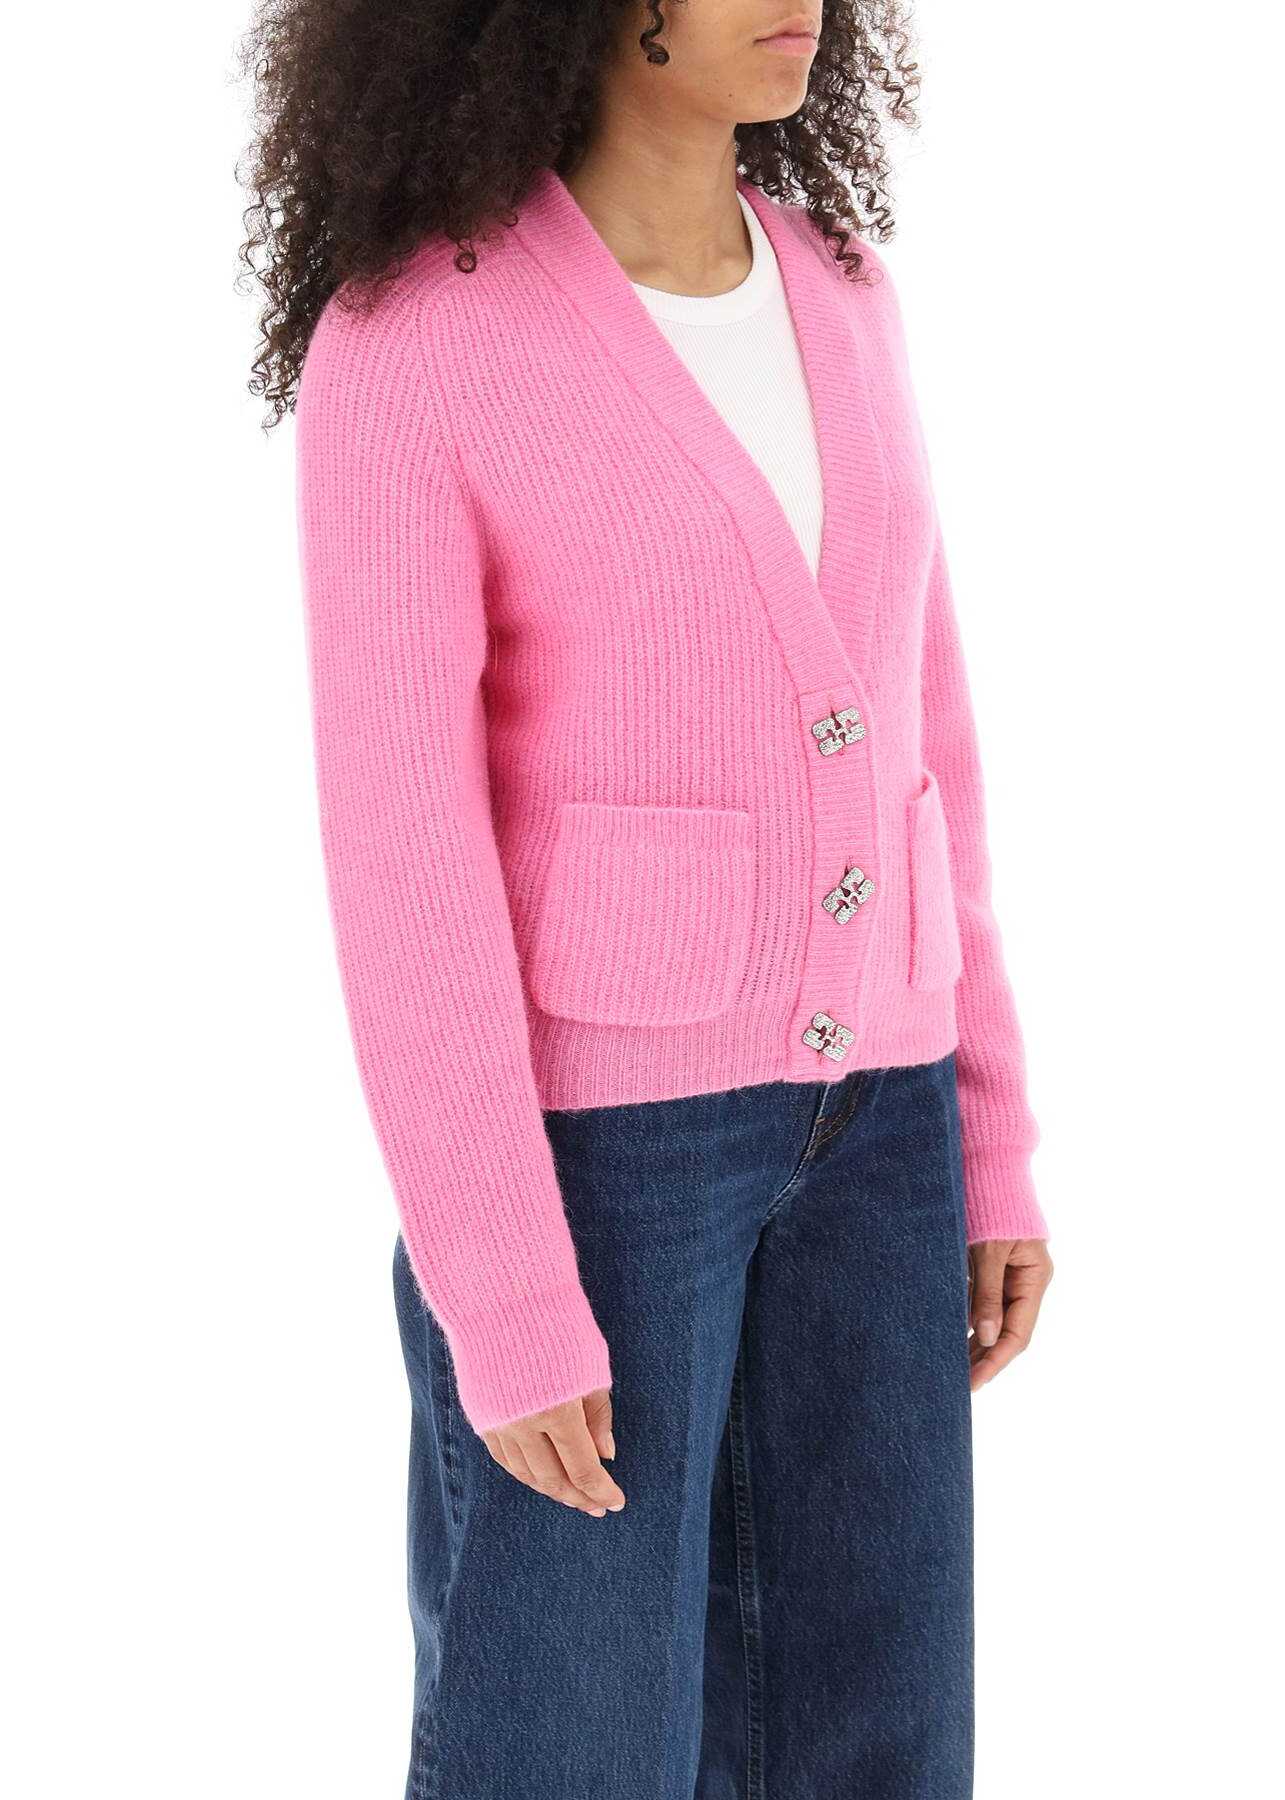 Ganni Wool Cardigan With Jewel Buttons WILD ORCHID image2